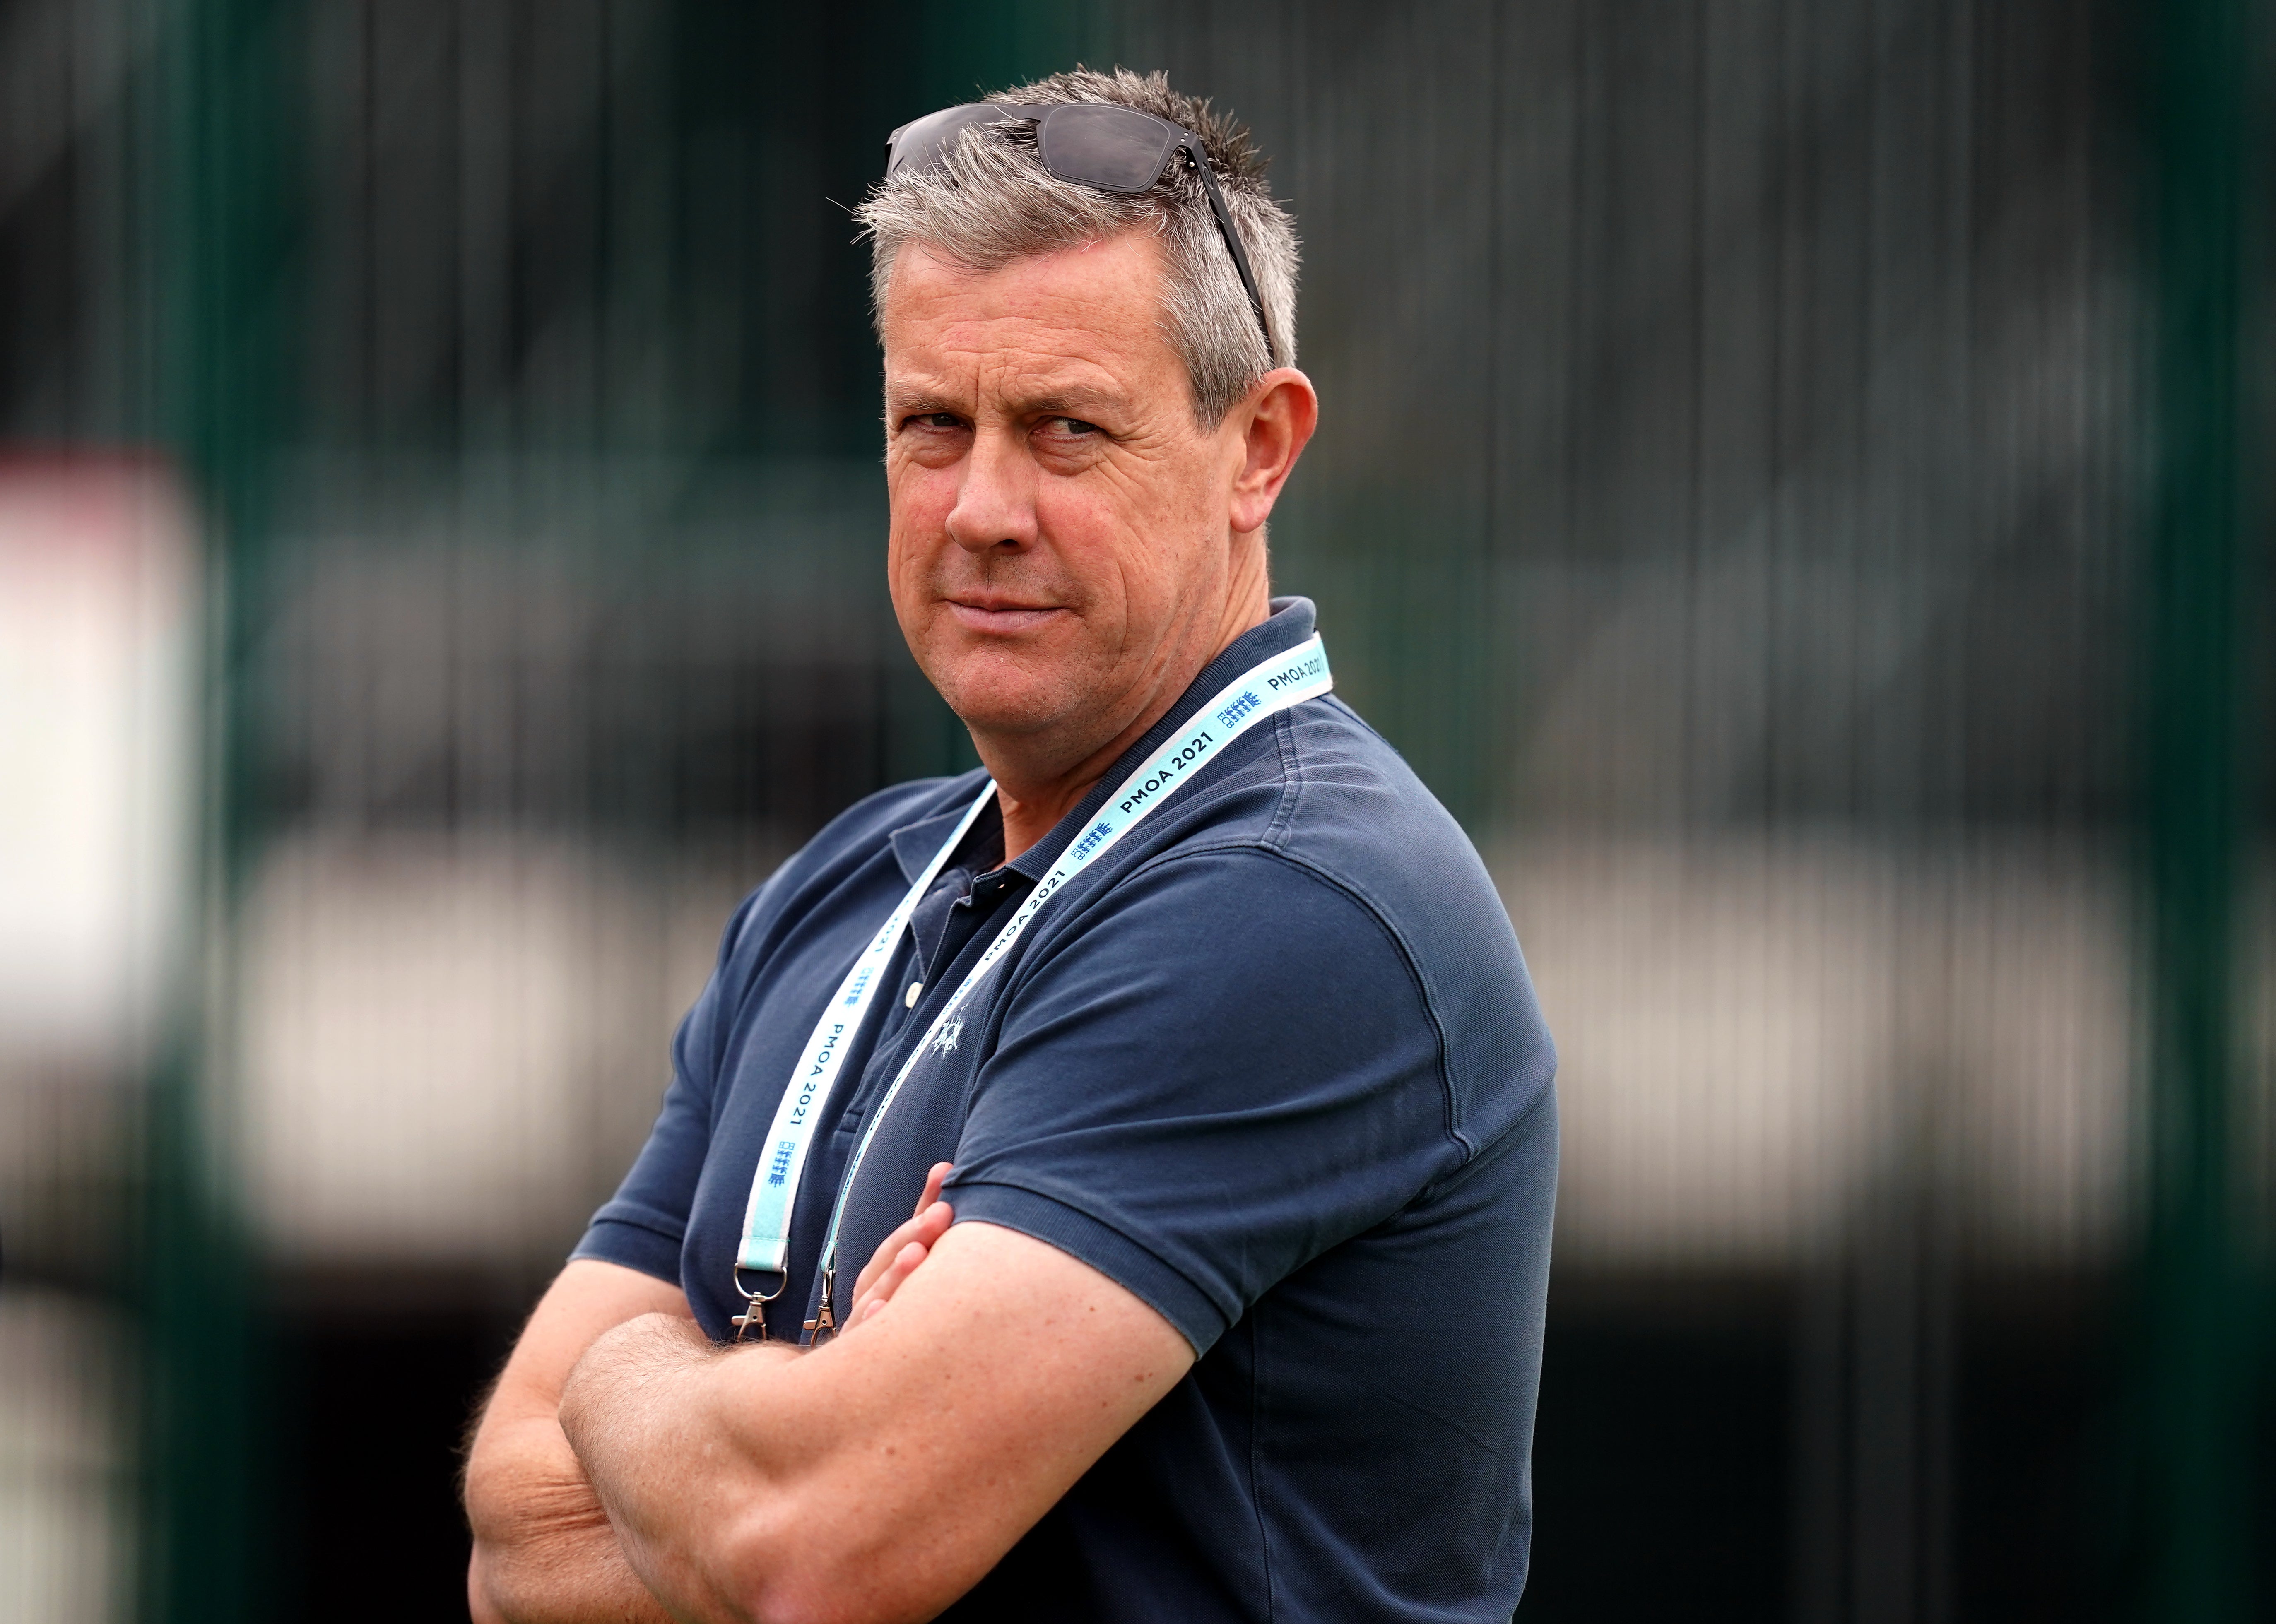 Ashley Giles stood down from his role as managing director of the England men’s team